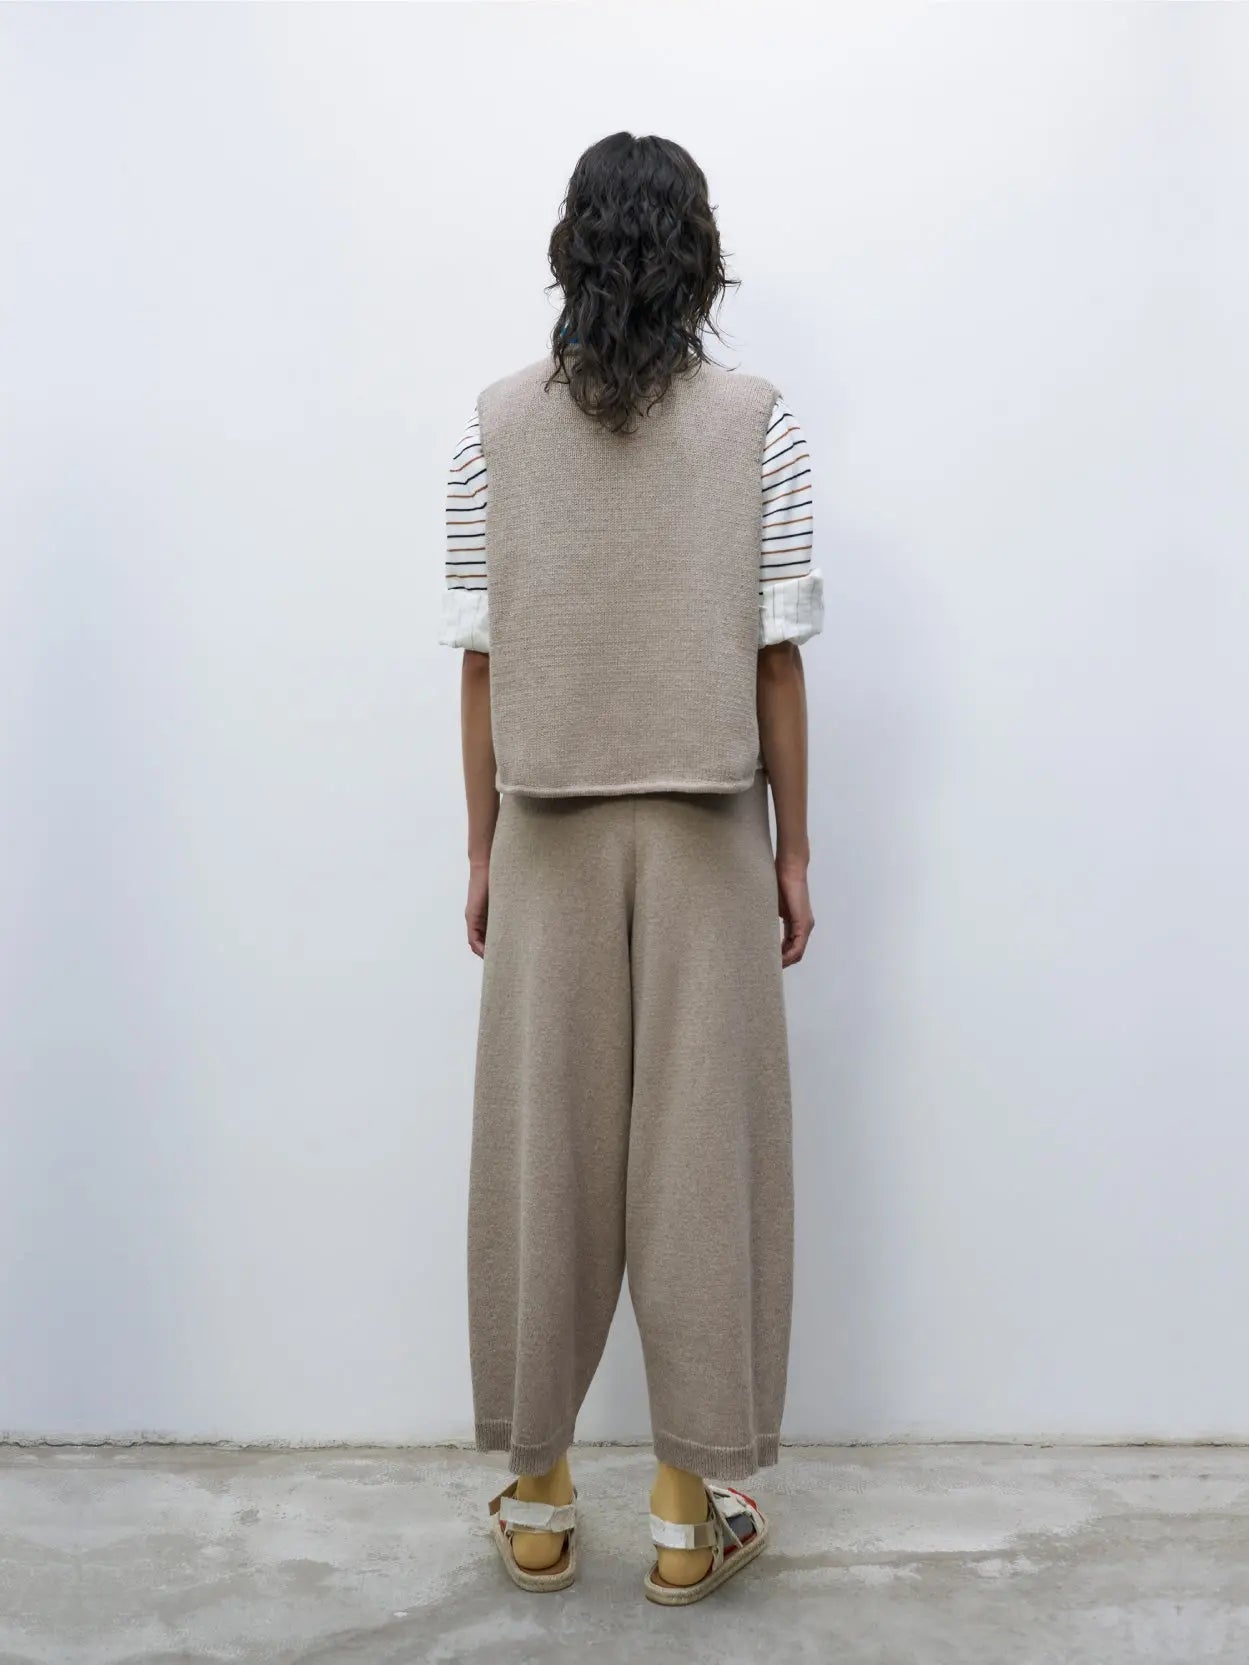 A pair of loose-fitting, knee-length, brownish-tan pants with an elastic waistband and ribbed cuffs at the hem is displayed on a plain white background. The material appears soft and slightly textured. Available as Cotton Knitted Pants Taupe by Cordera at Bassalstore in Barcelona.